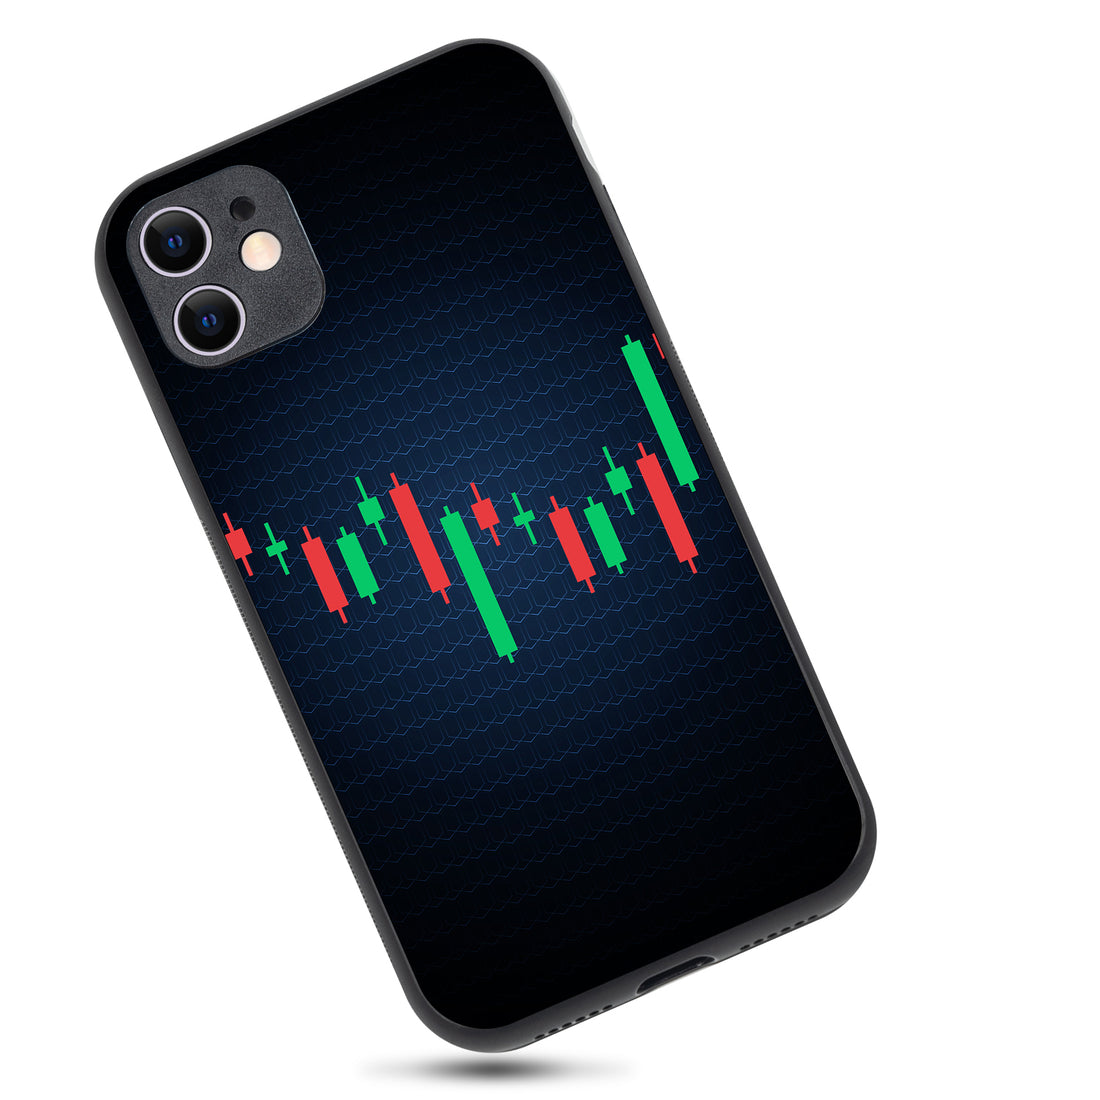 Candlestick Trading iPhone 11 Case